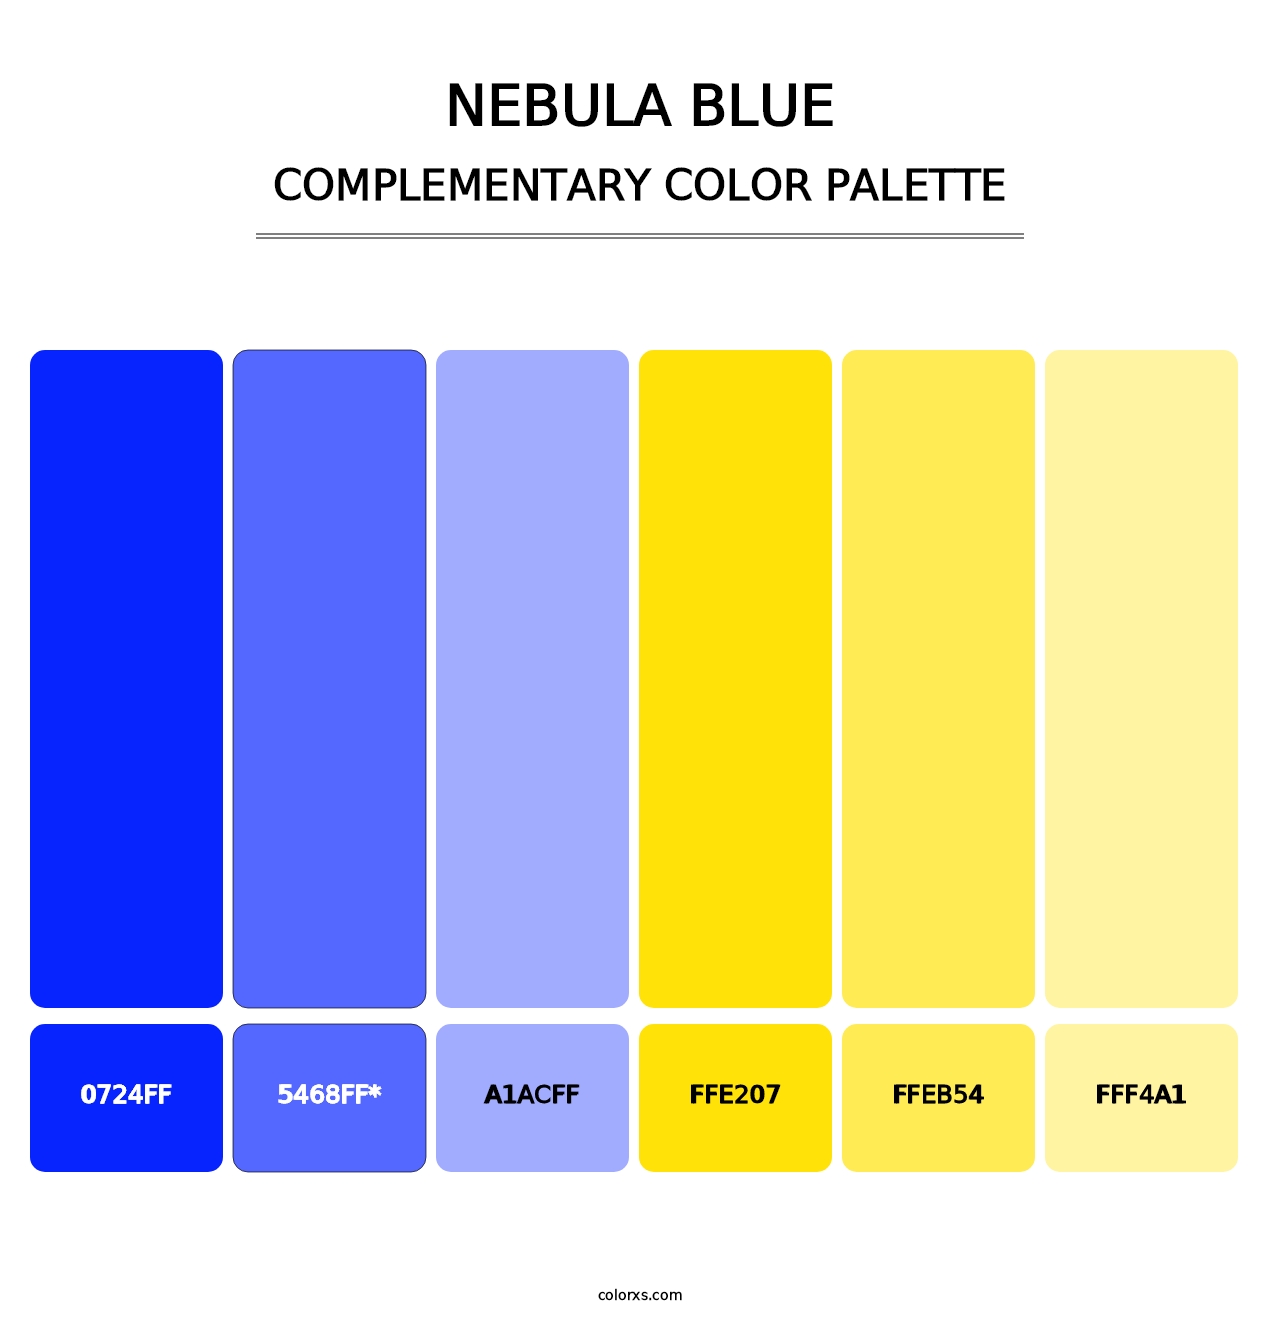 Nebula Blue - Complementary Color Palette